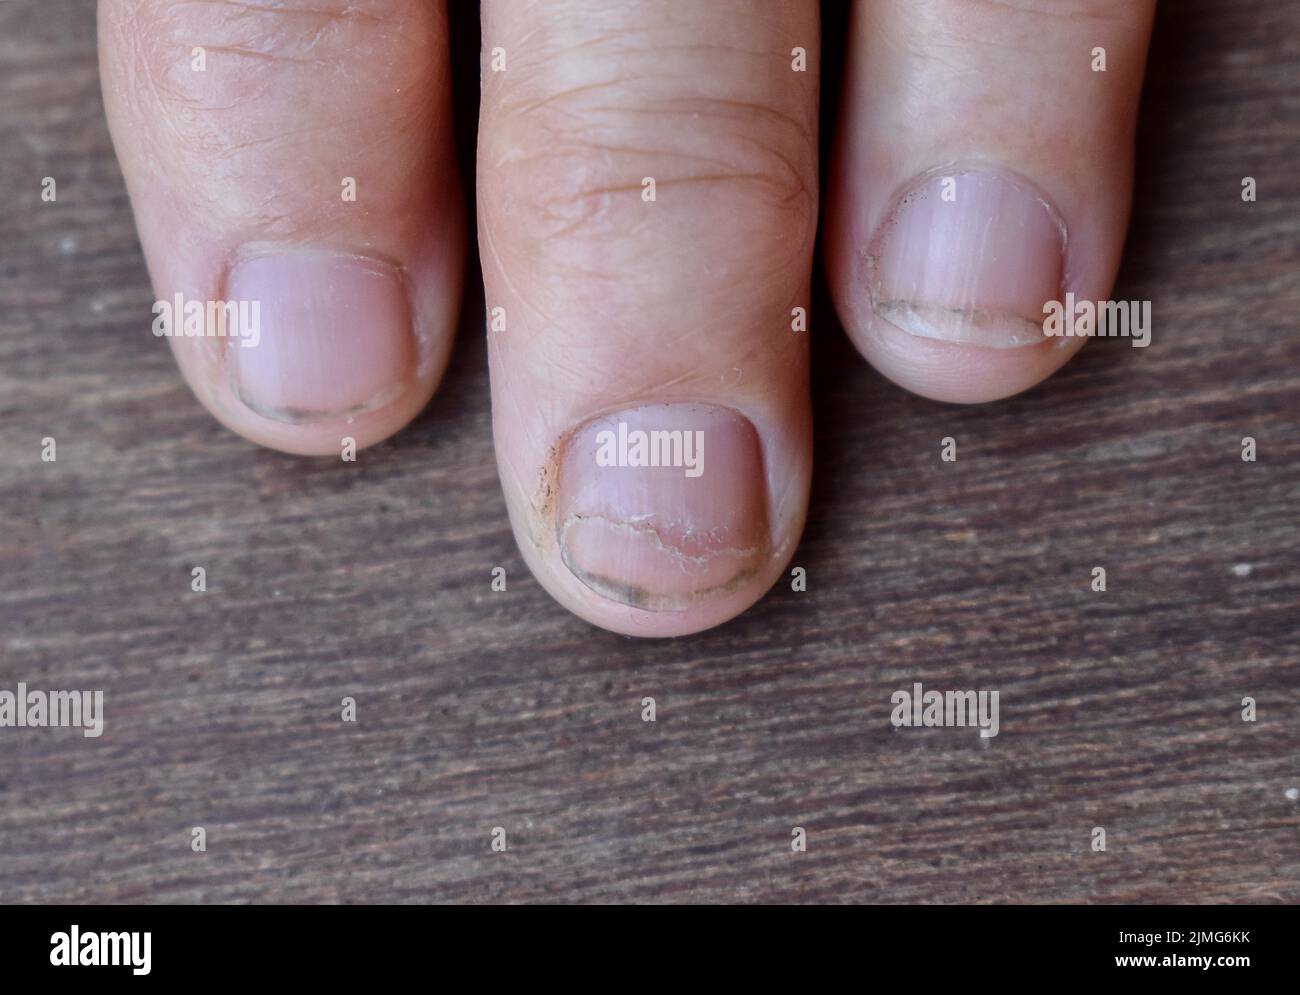 What vitamin are you lacking when your nails split? - Quora